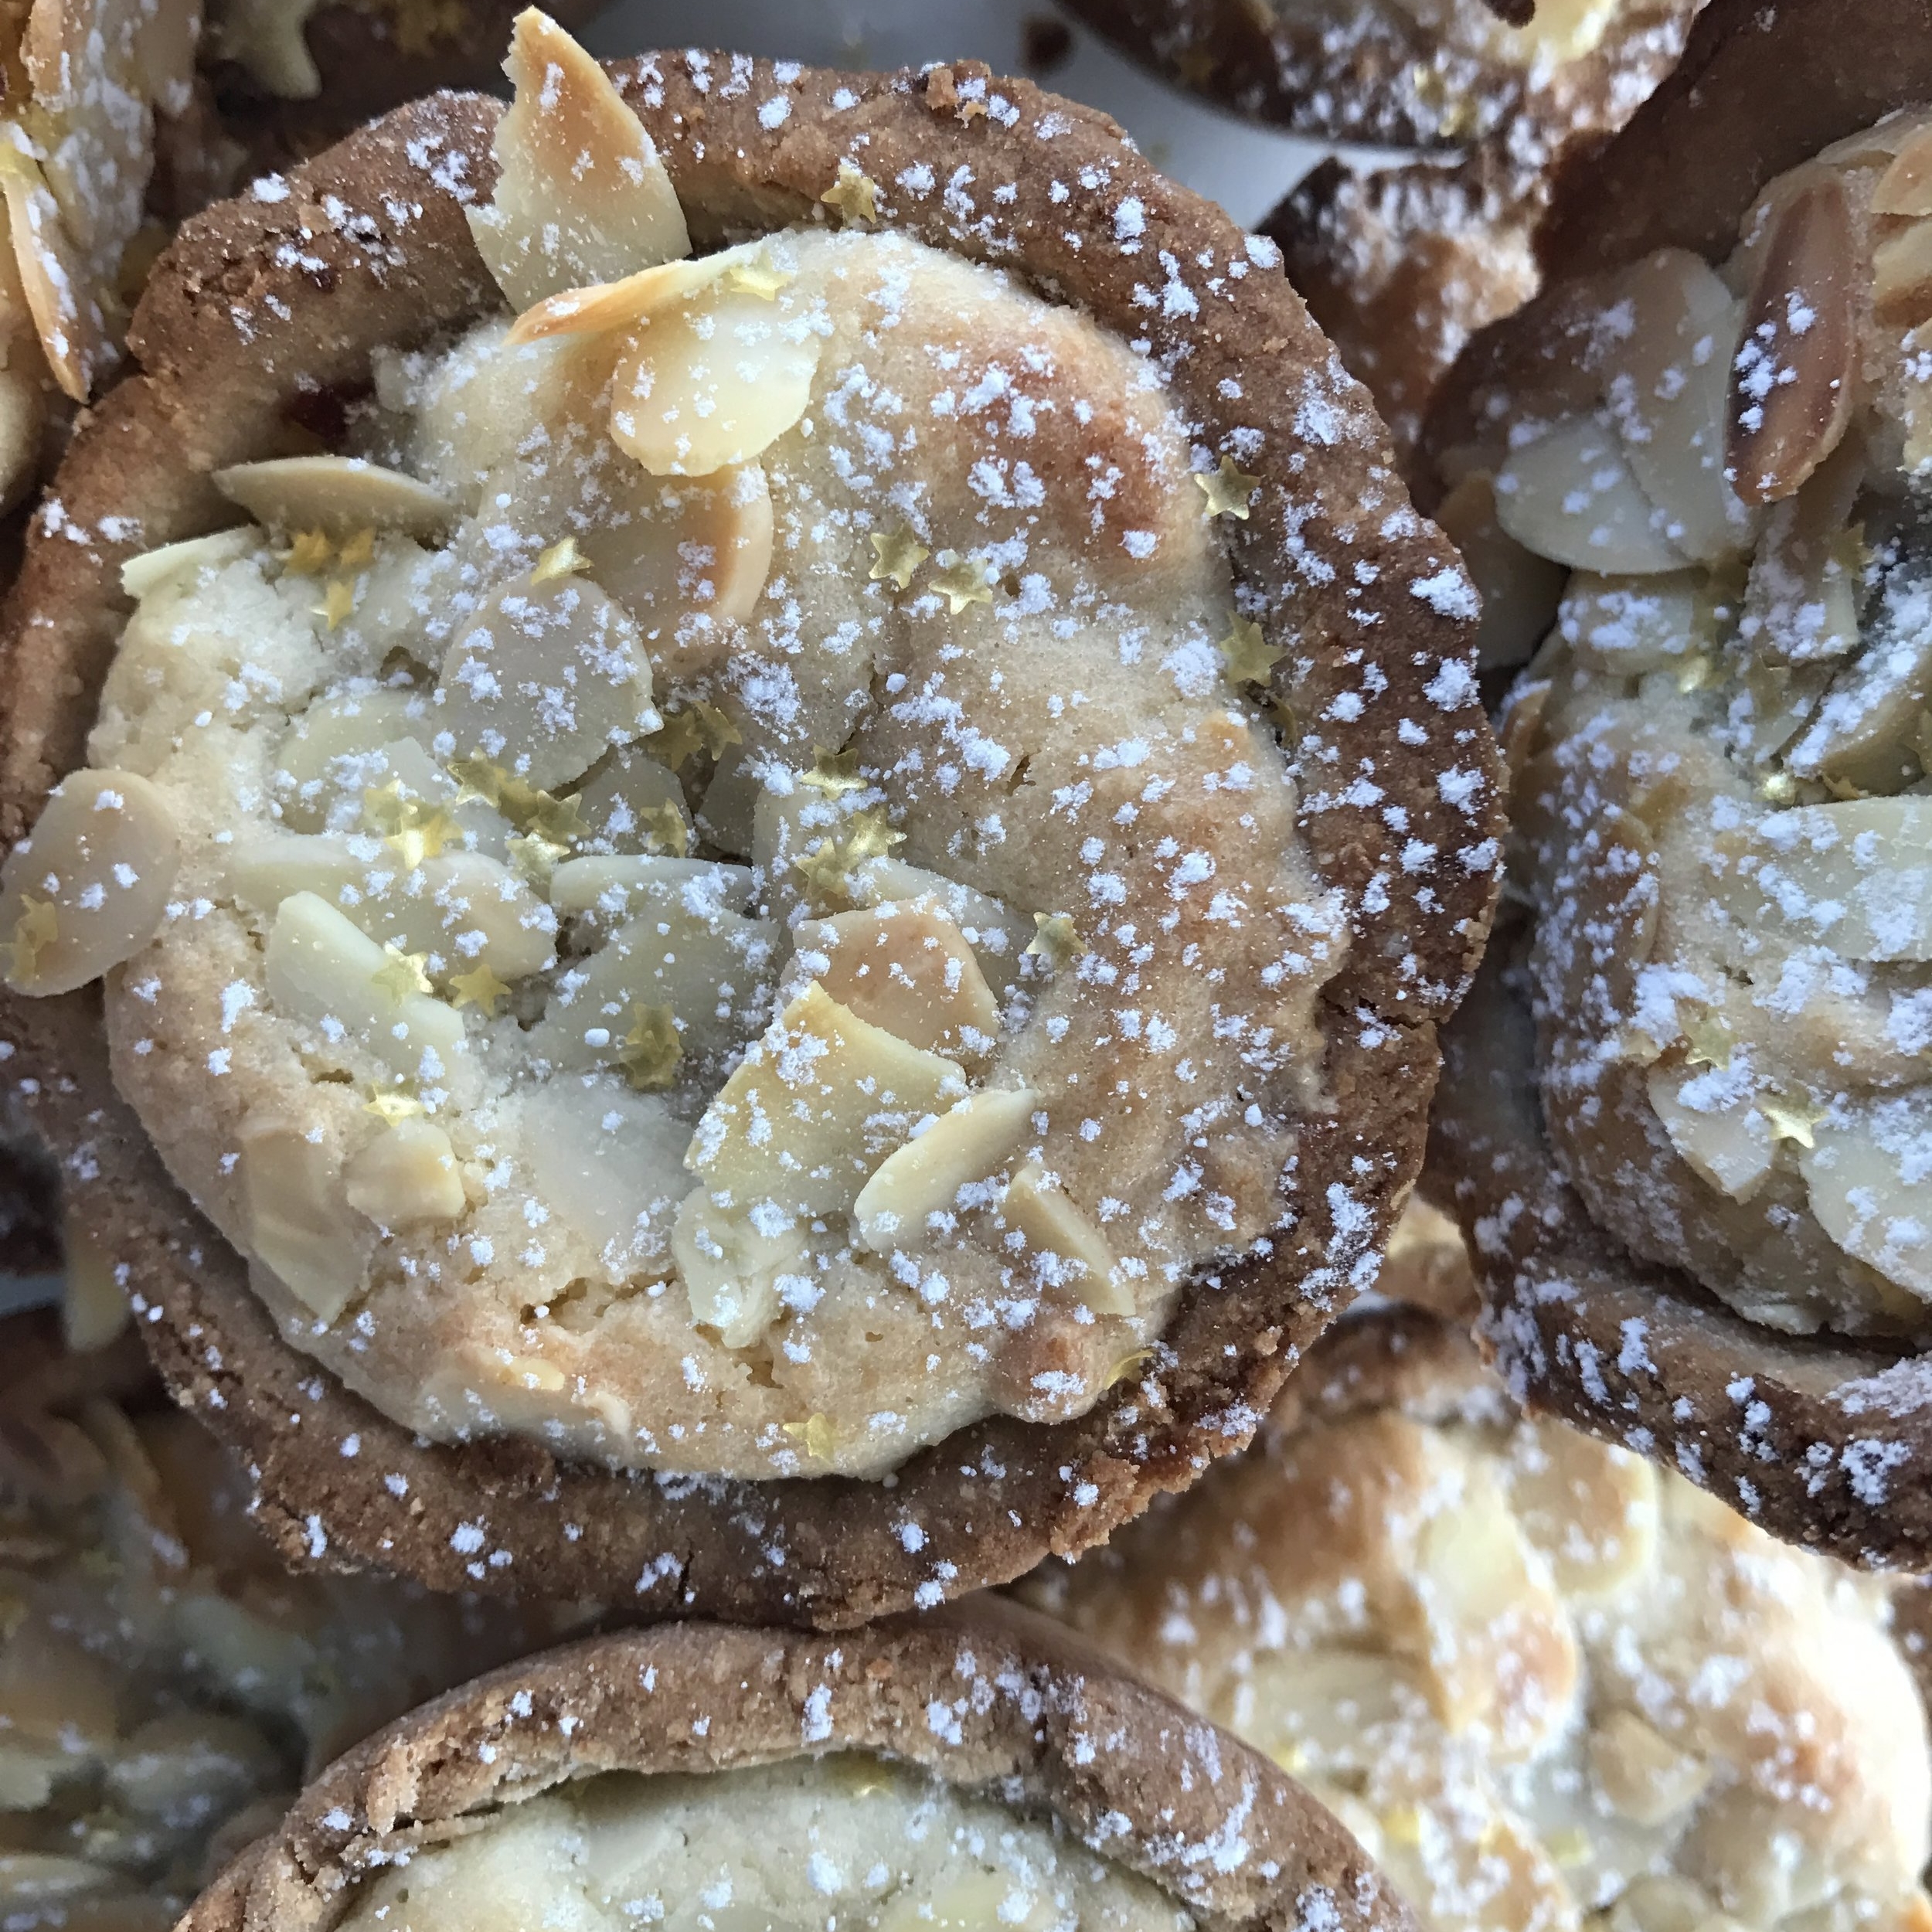 Chestnut and almond mince pies